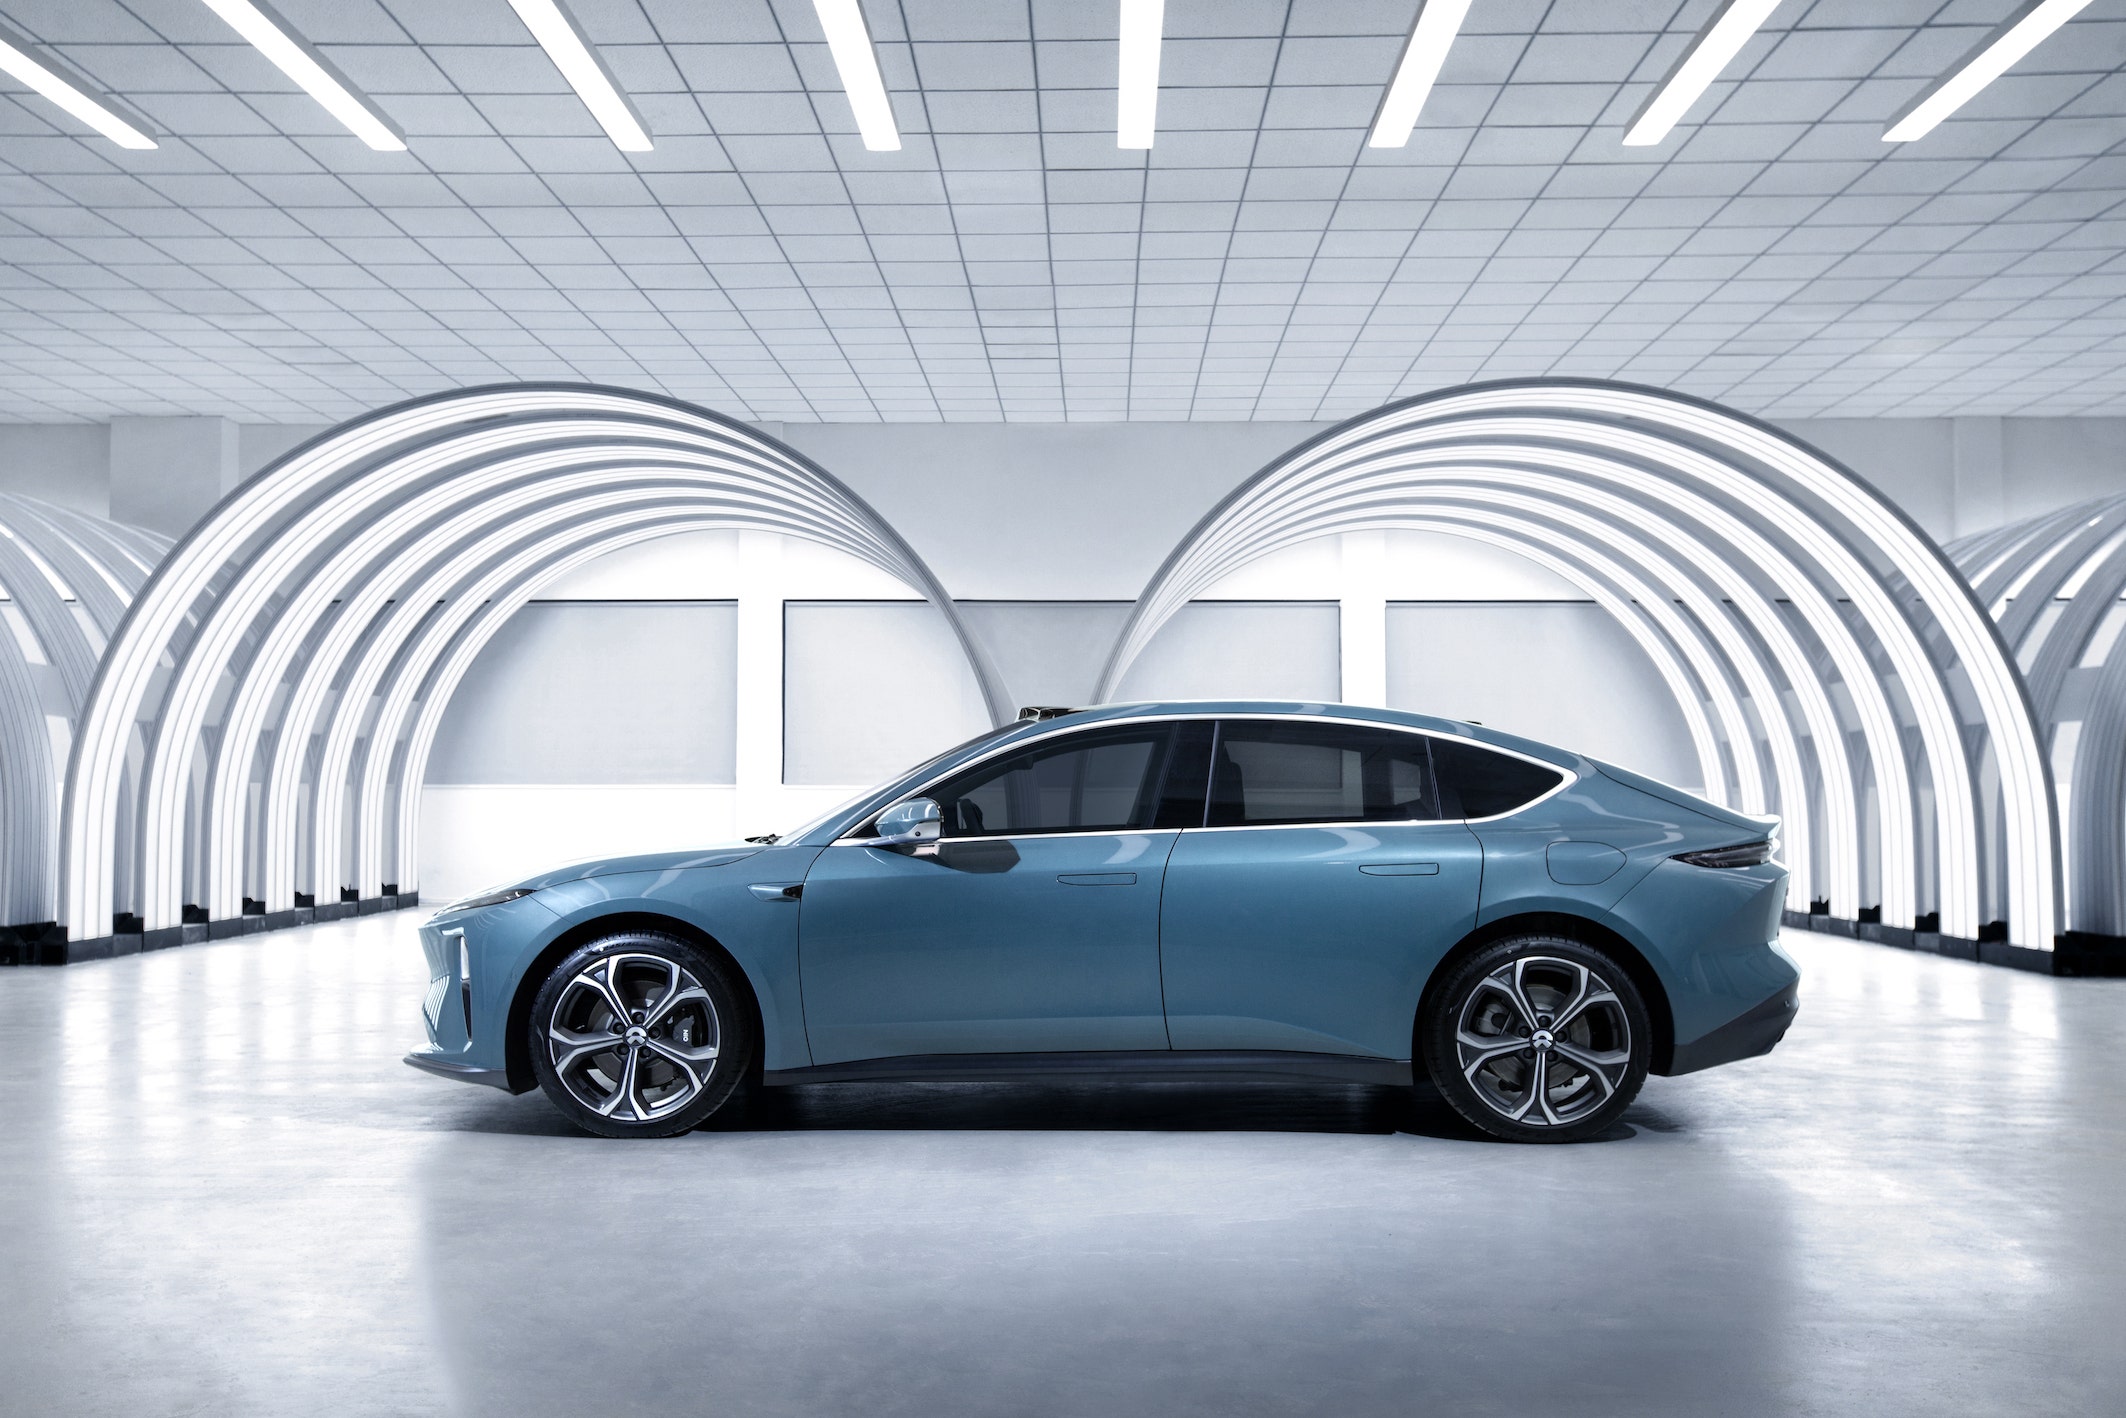 NIO Clocks Mixed Q2 Performance, Q3 Outlook Lags Expectations